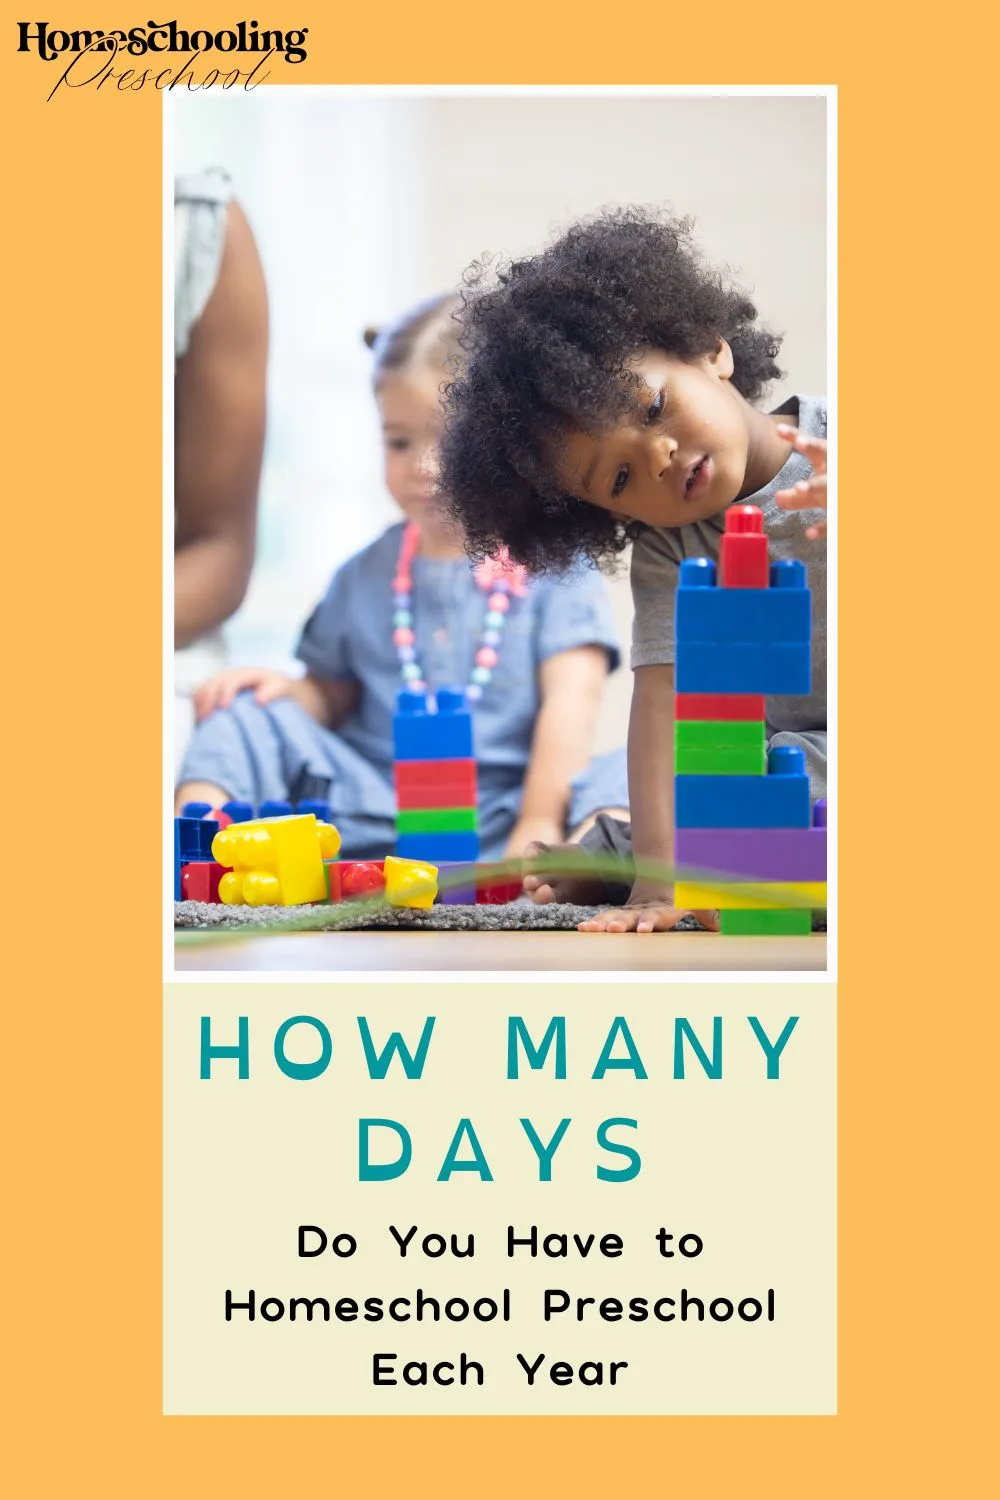 How Many Days Do You Have to Homeschool Preschool Each Year-